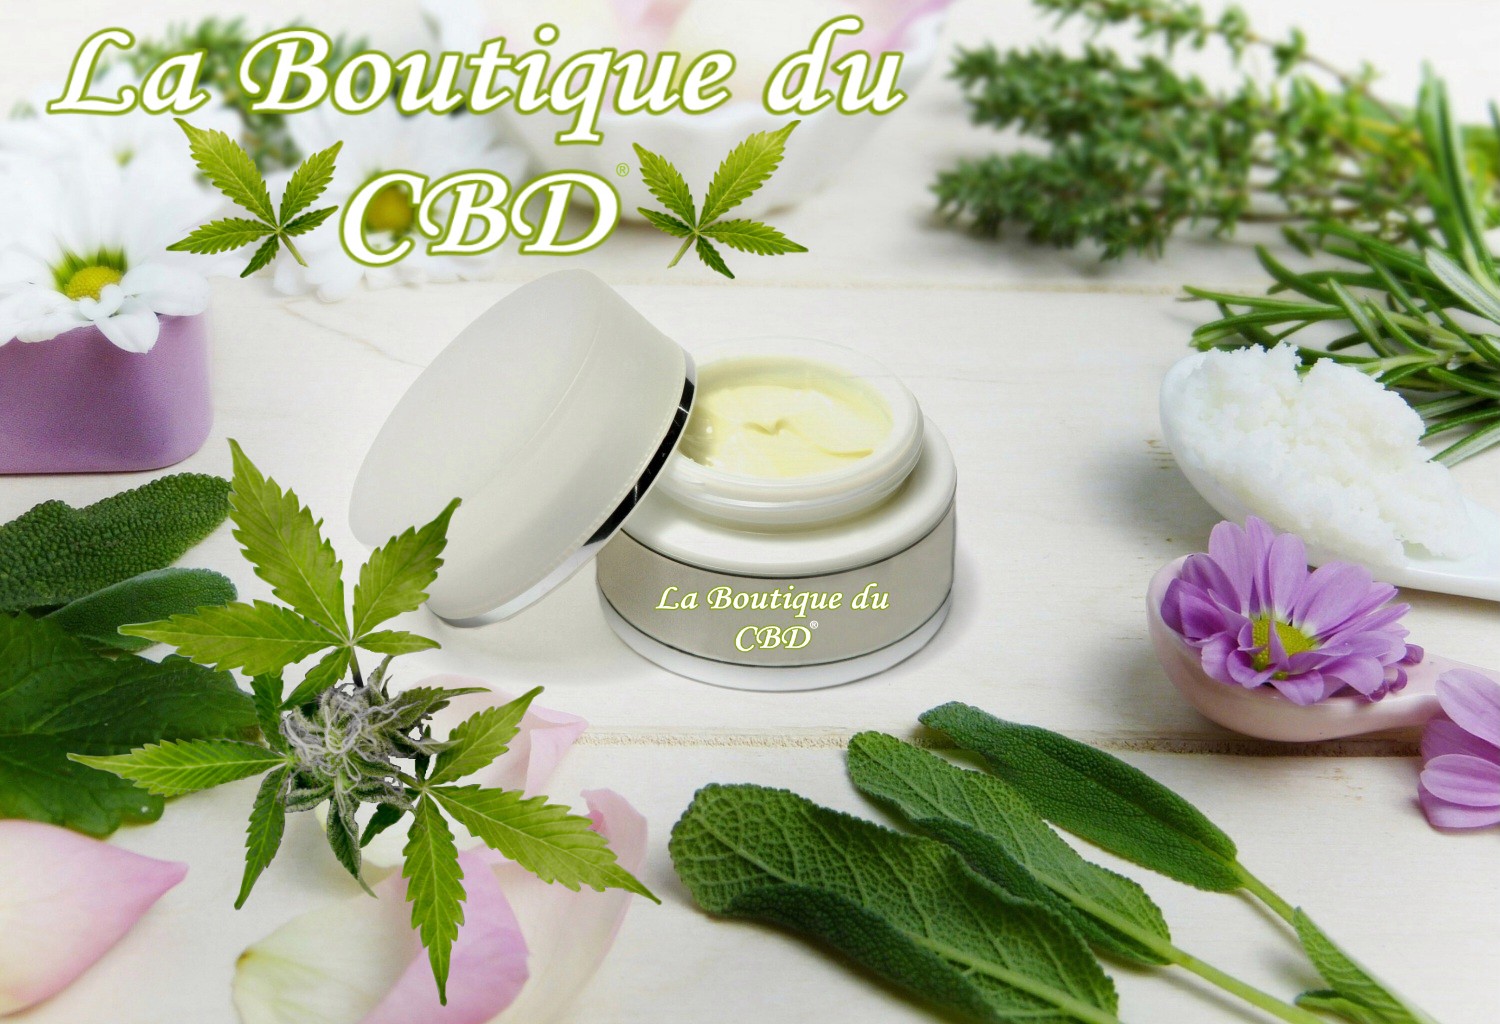 COSMETIQUES CBD SAILLY 78